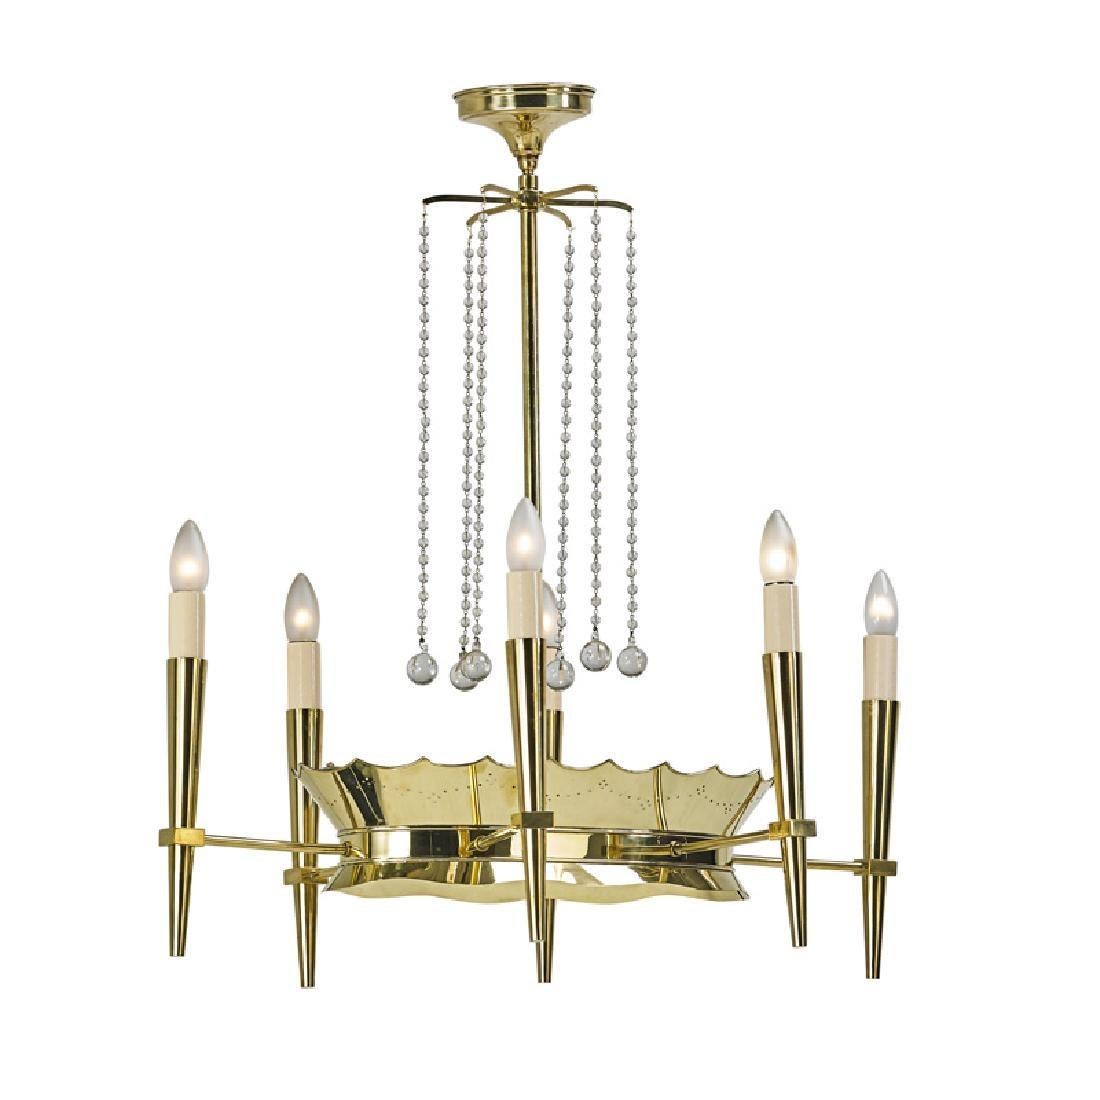 A six arm chandelier in the manner of Tommi Parzinger. Unique oval crown shaped central design holds a frosted glass diffuser. Center canopy contains six cascading crystal drops with prisms. Possibly a custom piece or prototype. The brass has been